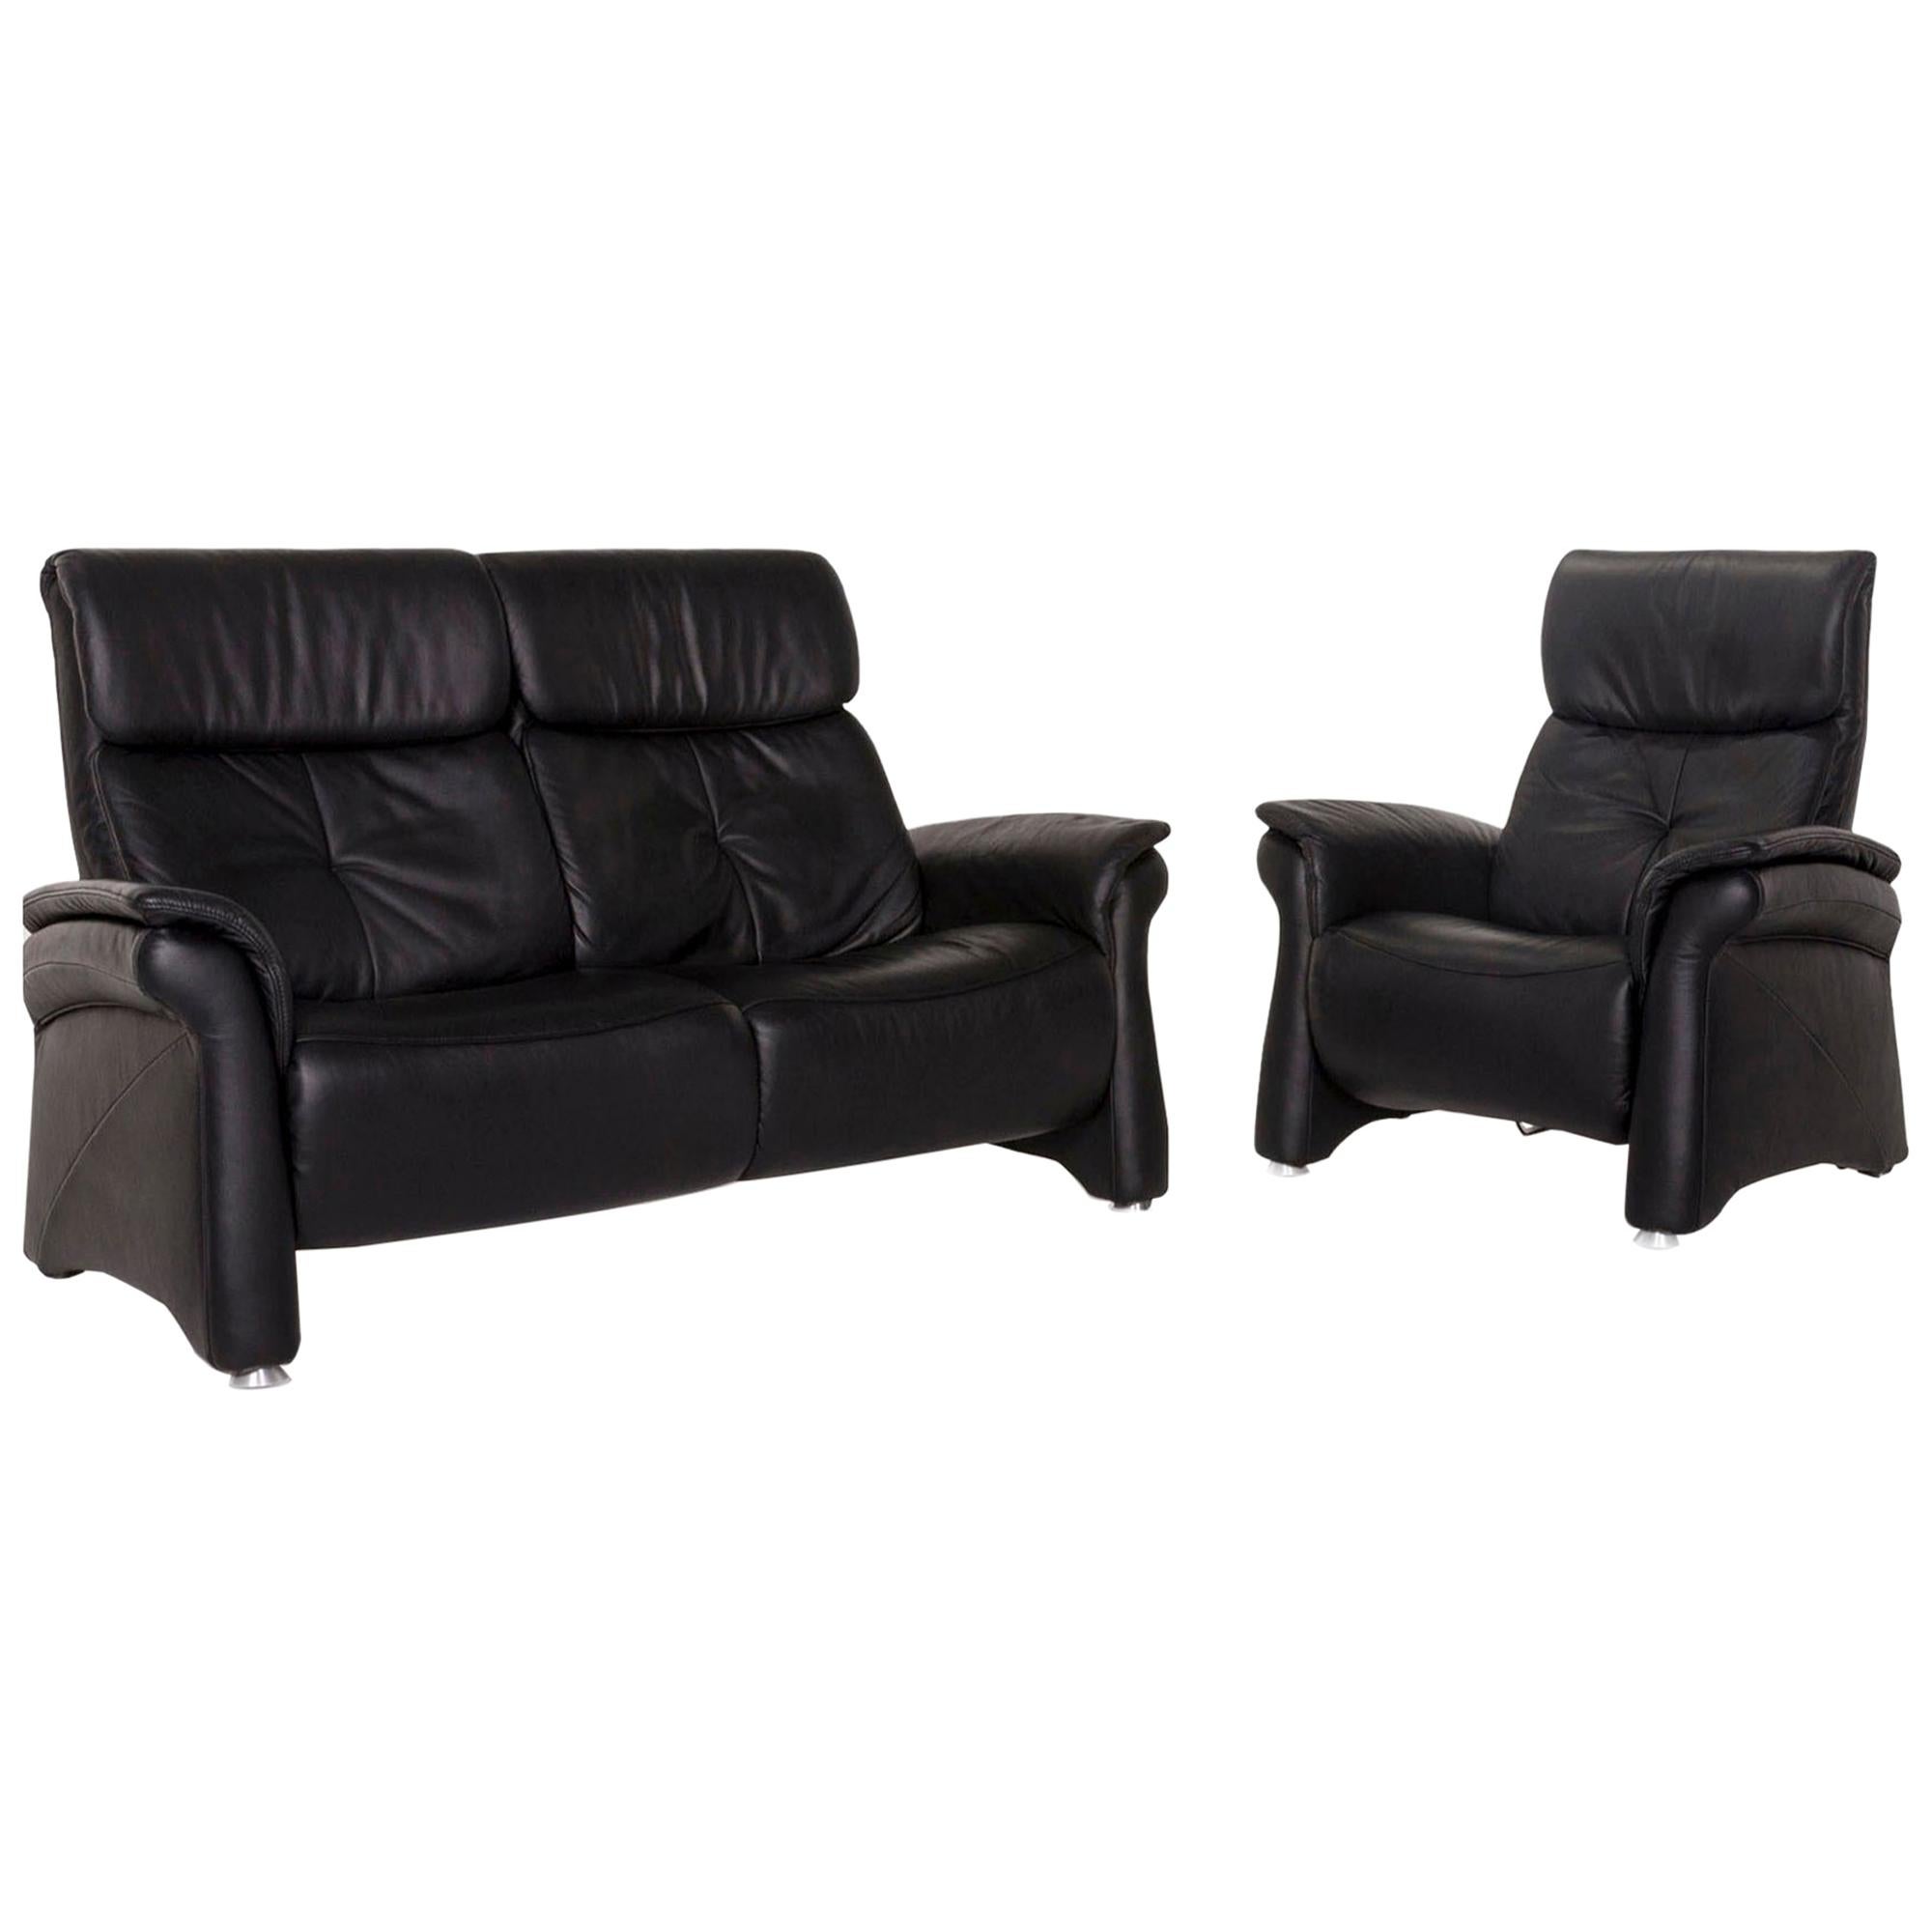 Mondo Leather Sofa Set Black 1 Sofa 1 Armchair Relax Function Function For Sale